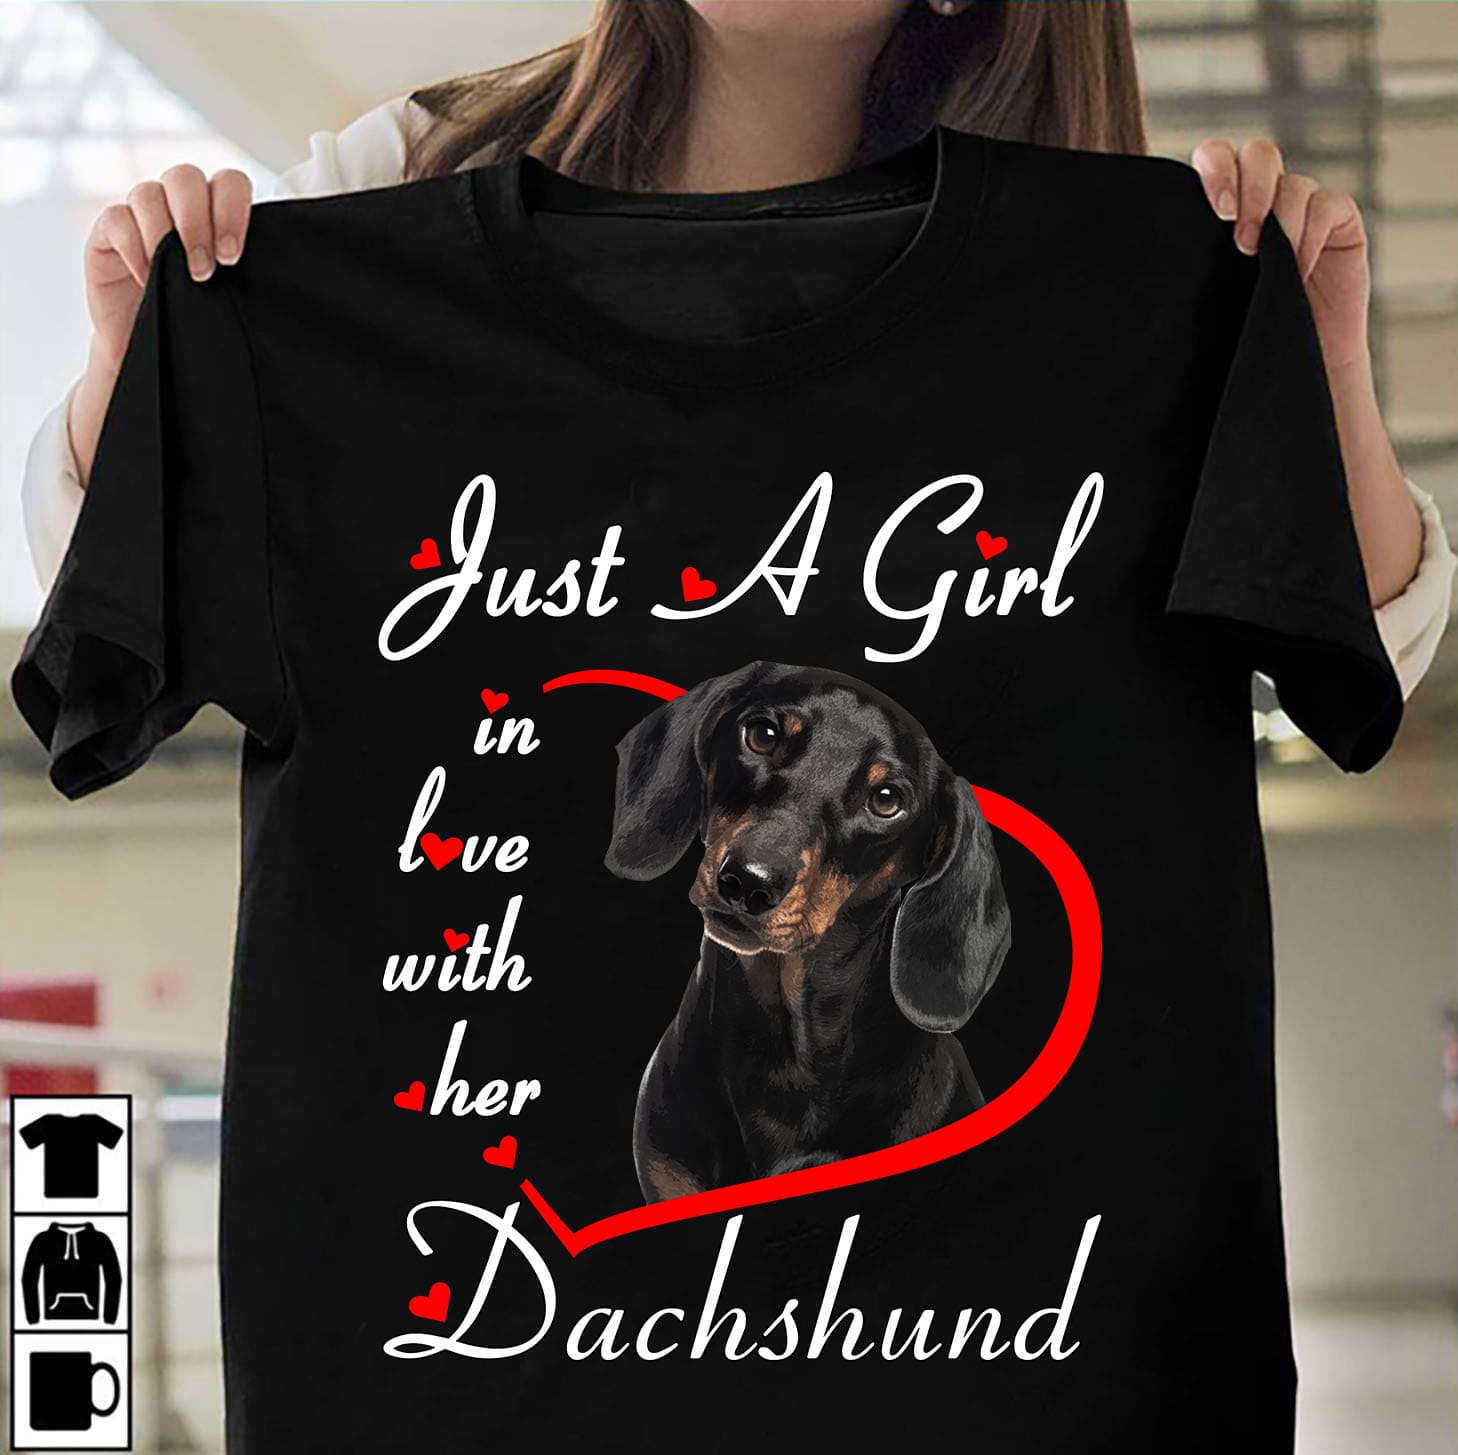 Just a girl in love with her Dachshund - Gift for dog lover, girl loves DachshundJust a girl in love with her Dachshund - Gift for dog lover, girl loves Dachshund